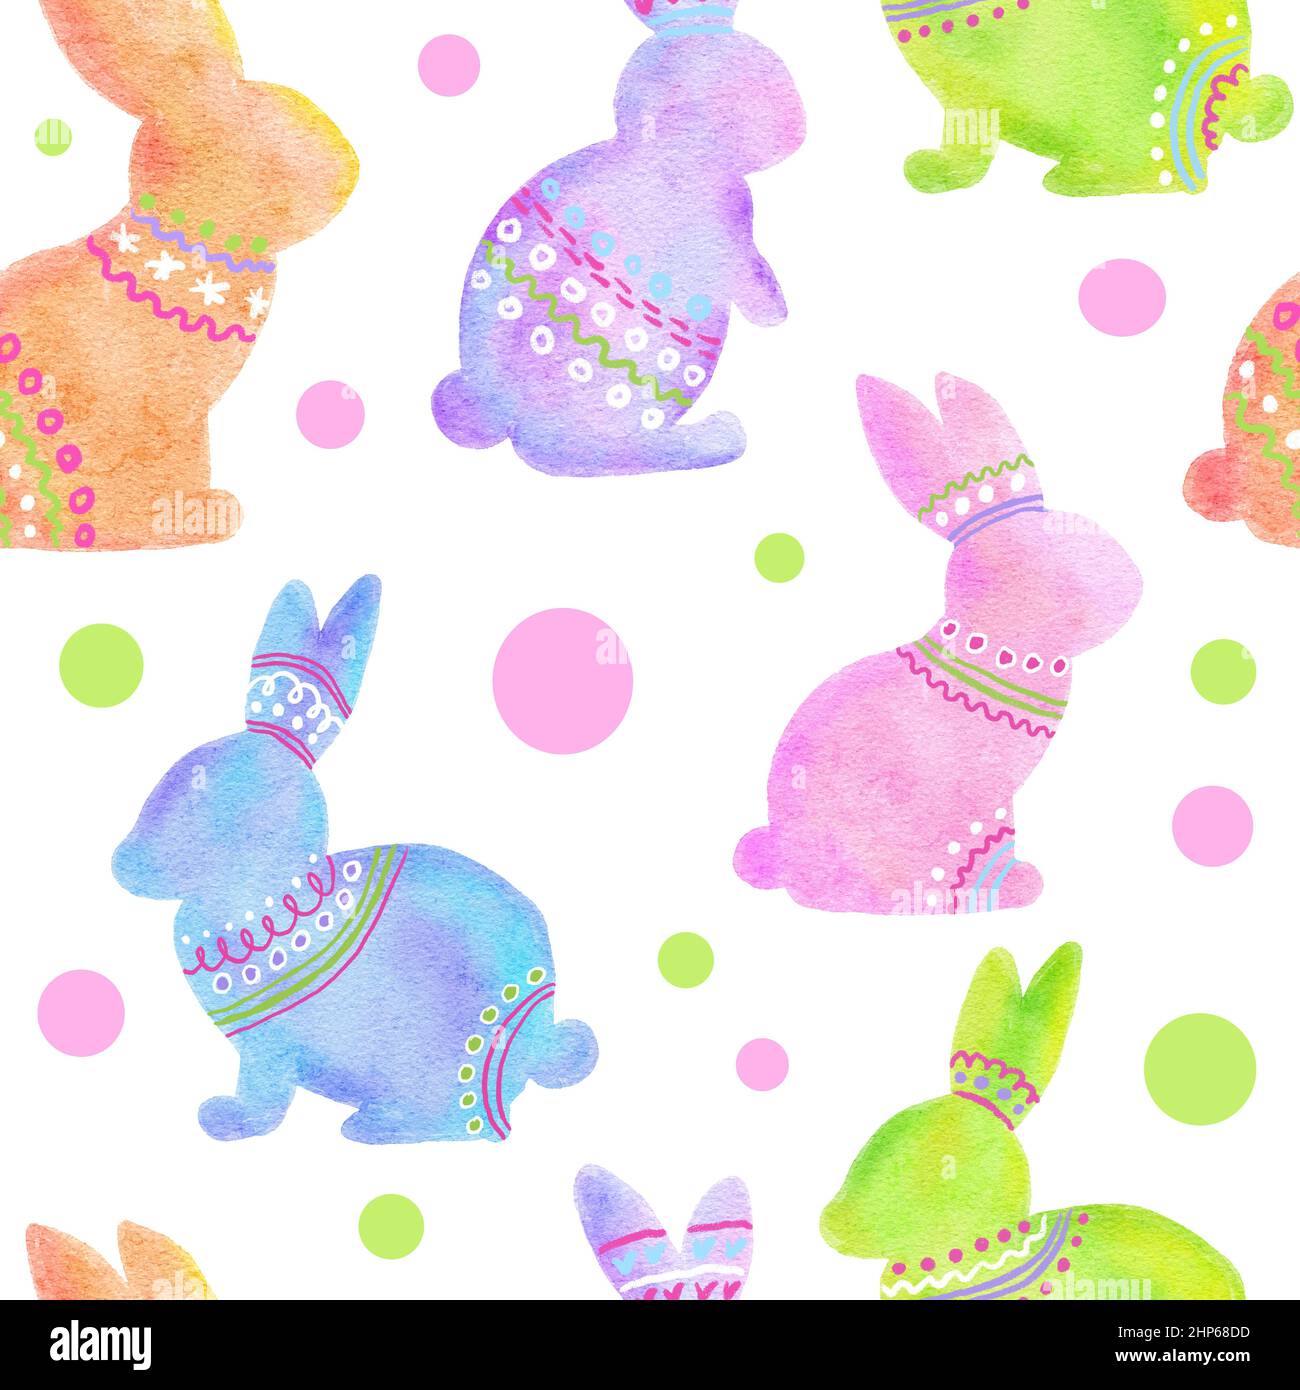 Watercolor seamless hand drawn pattern with pastel Easter bunnies rabbits. Bright colorful background with animal print for religious celebration spring decor, pink blue green colors grass polka dot elements Stock Photo